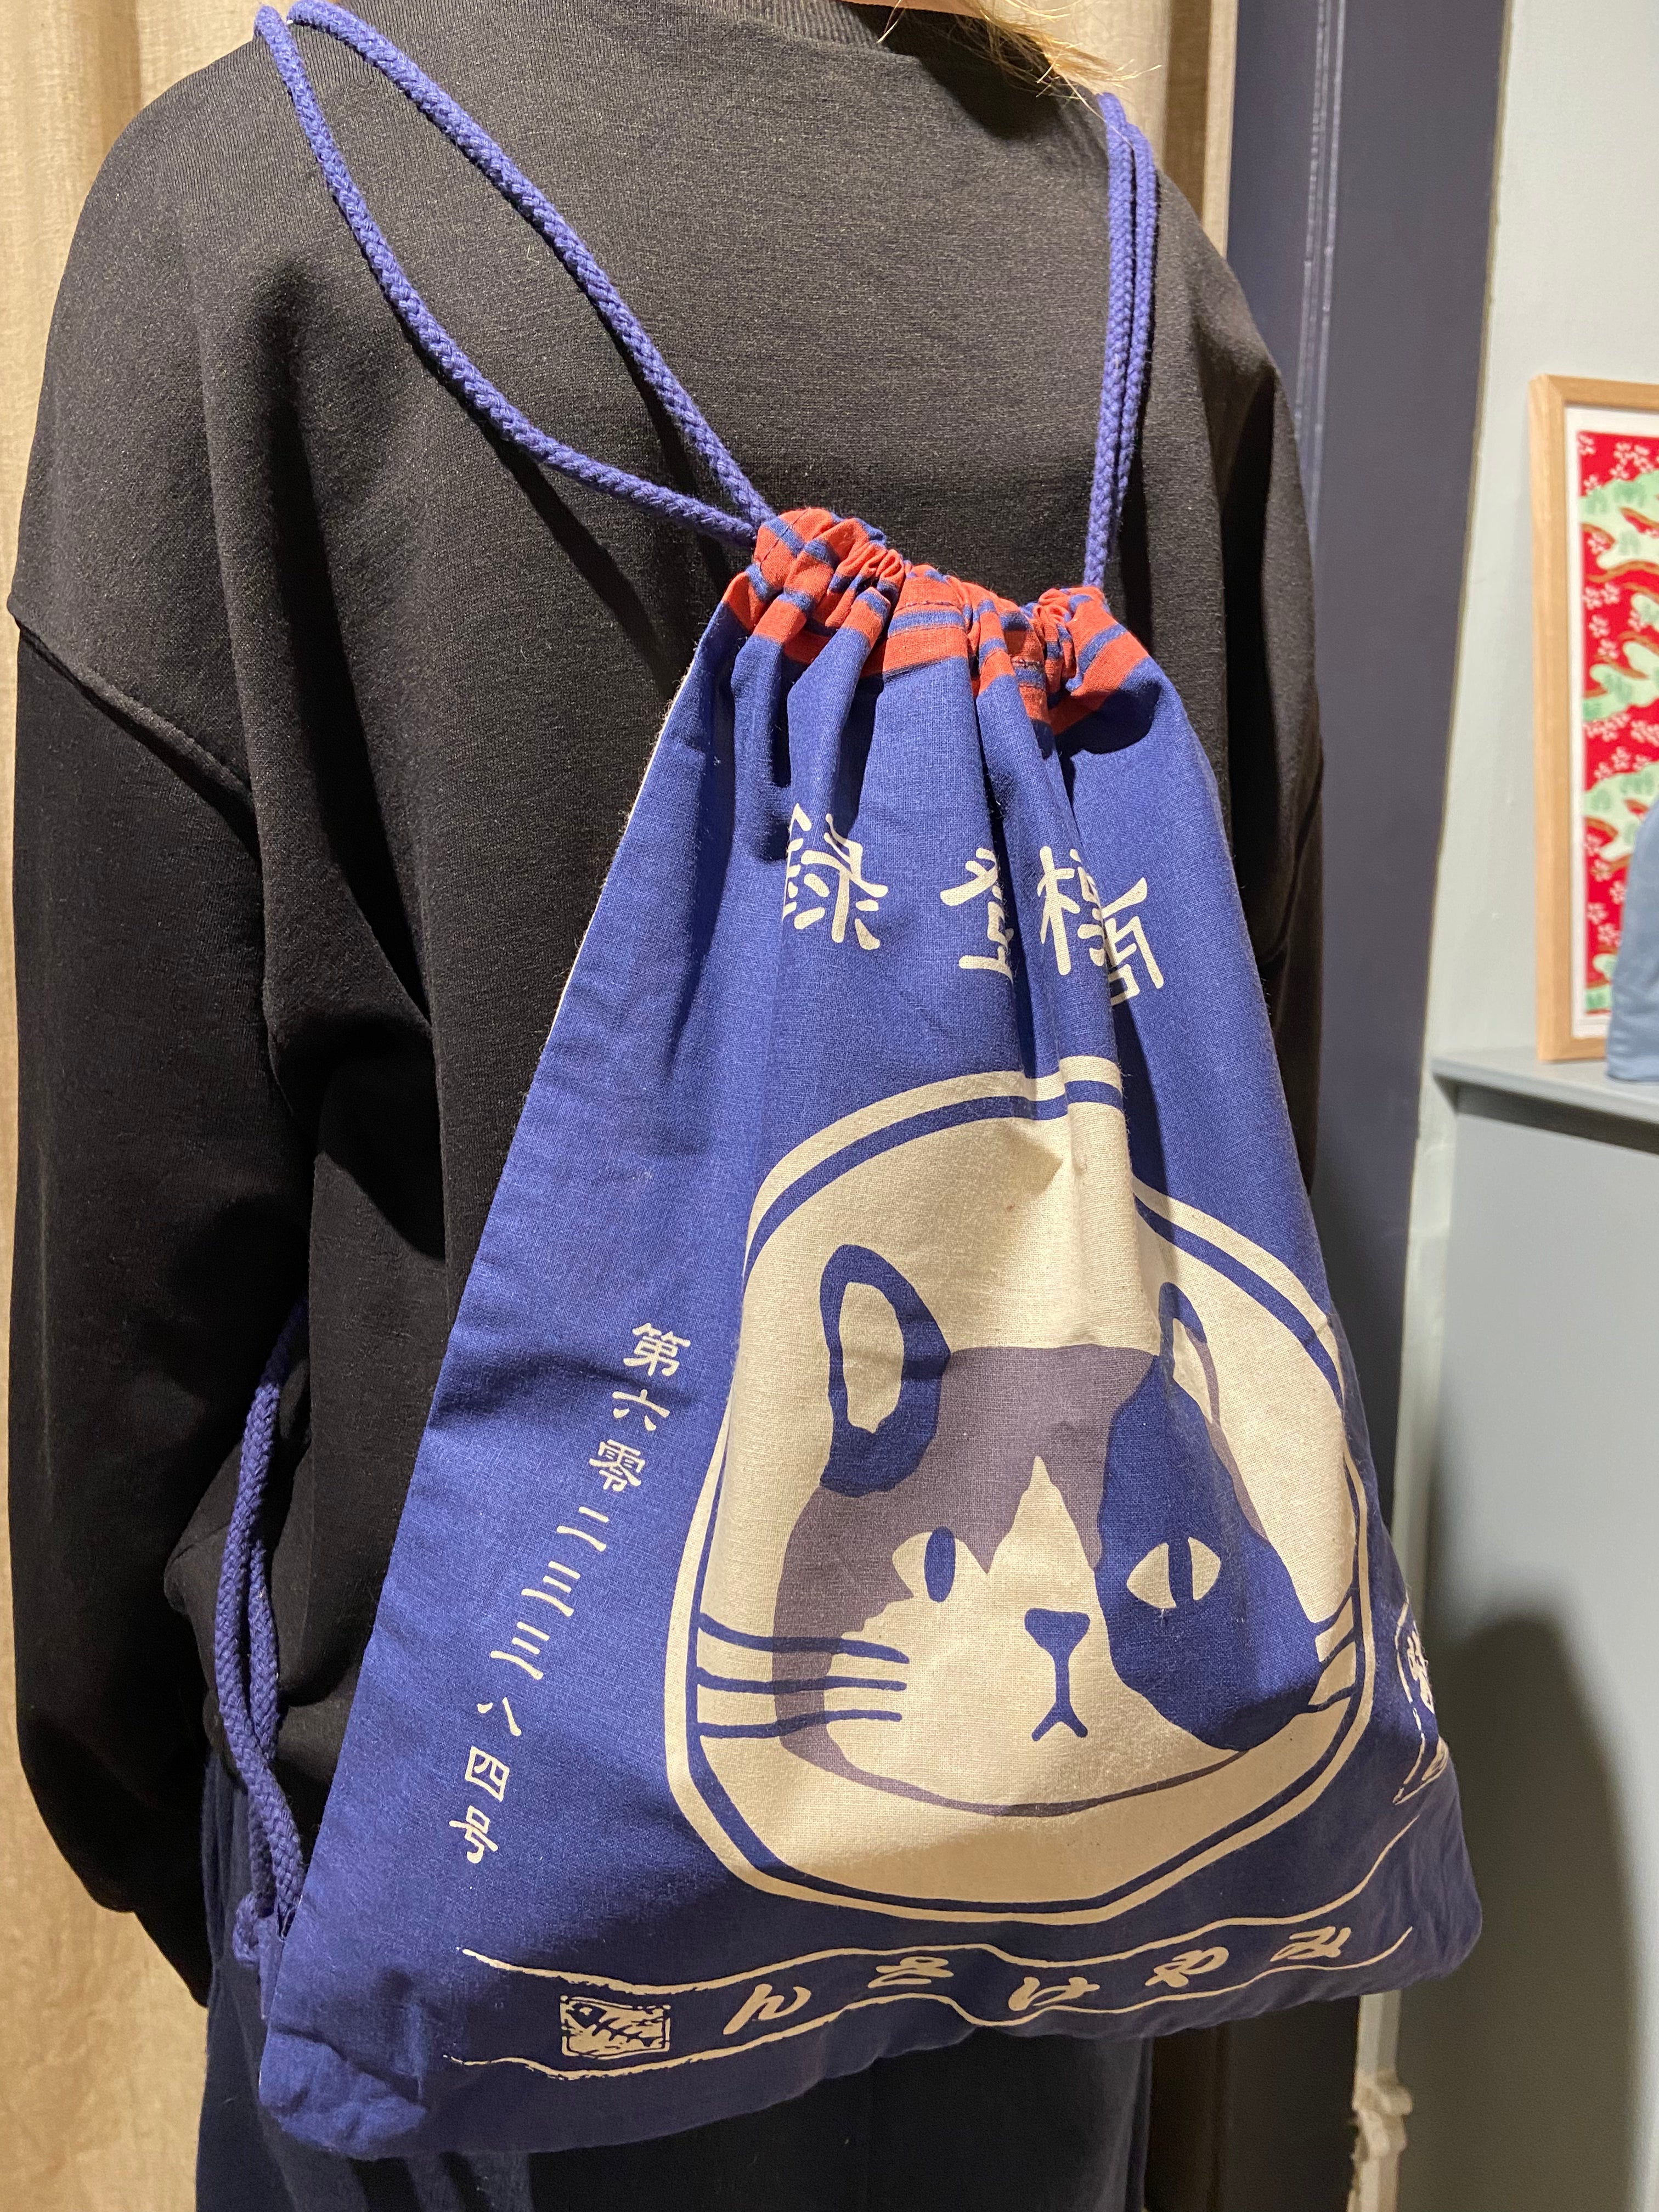 Japanese tote bag/backpack with cat